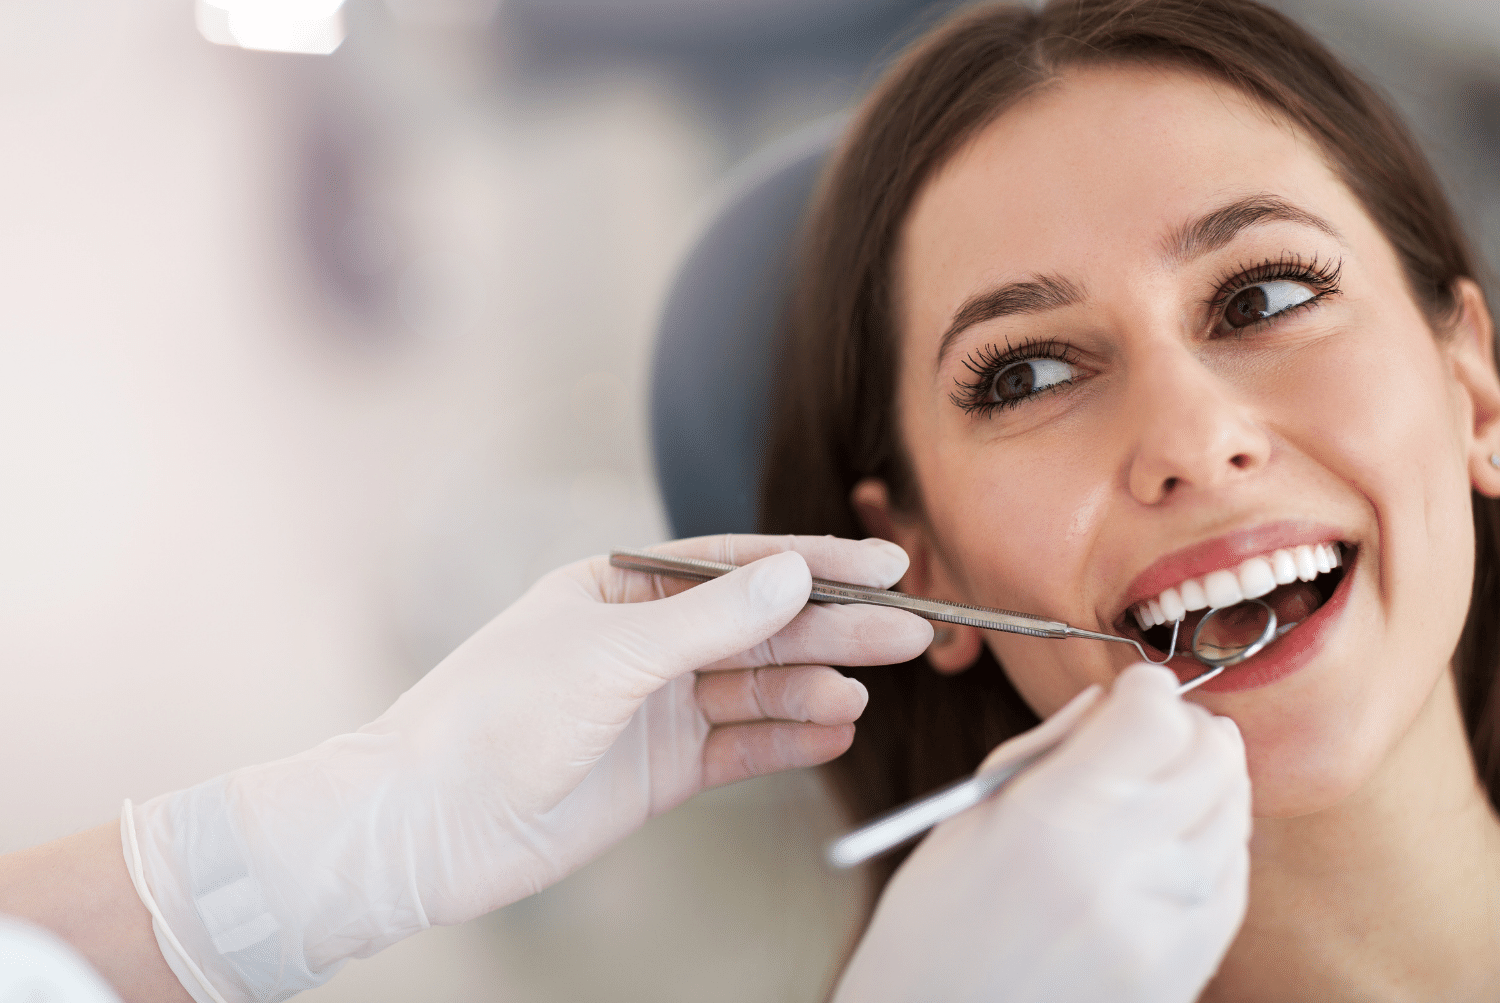 Everything You Need to Know About Tooth Extractions - Dr. Boals